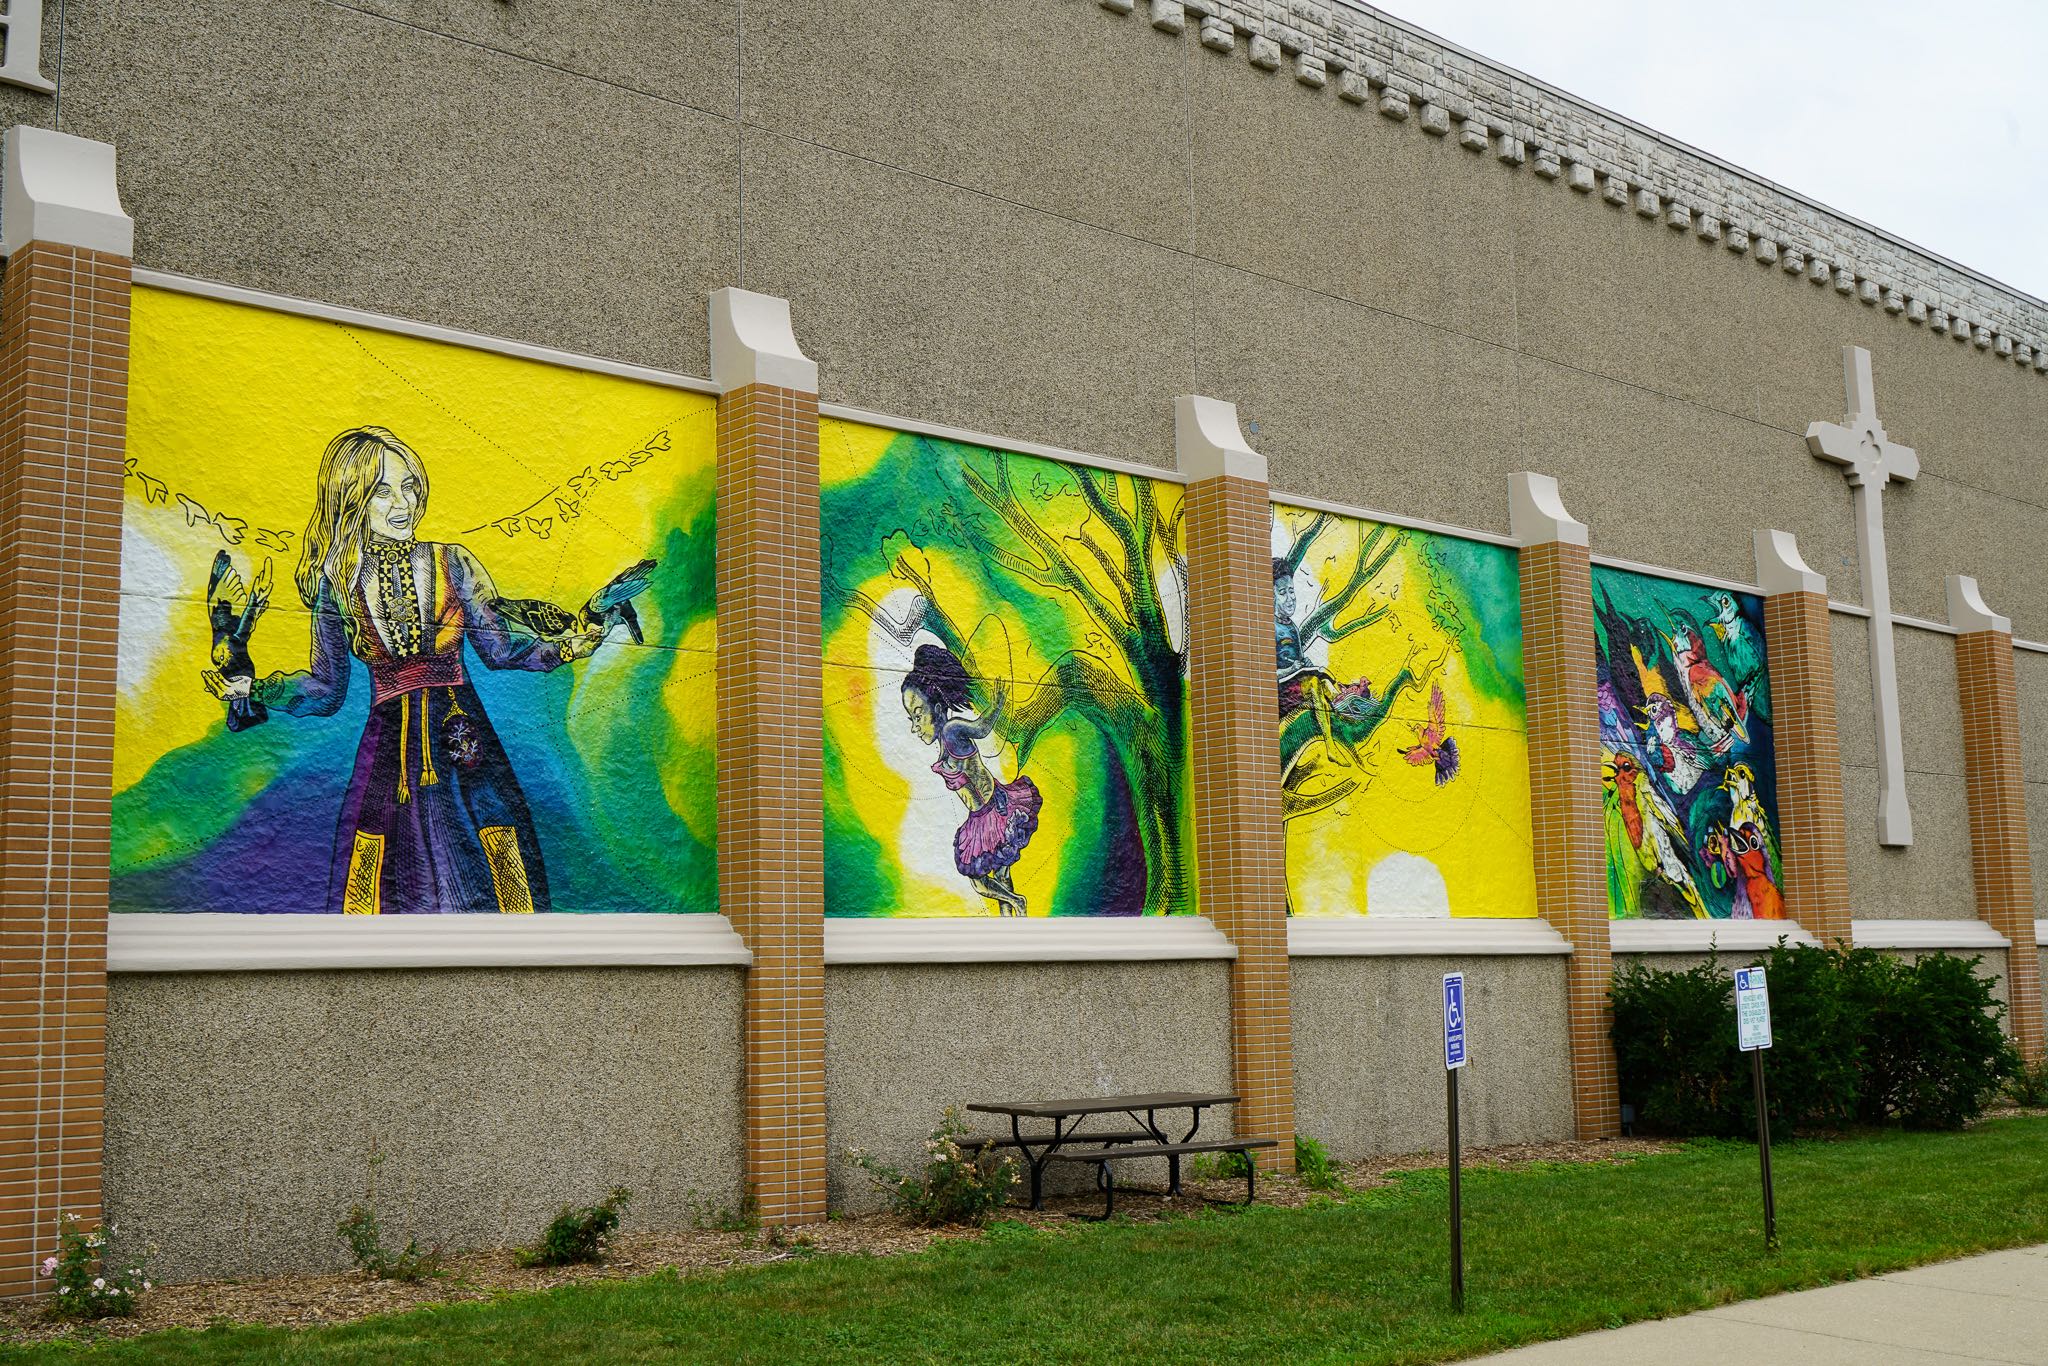 Giant Mural at Lutheran Church with Birds